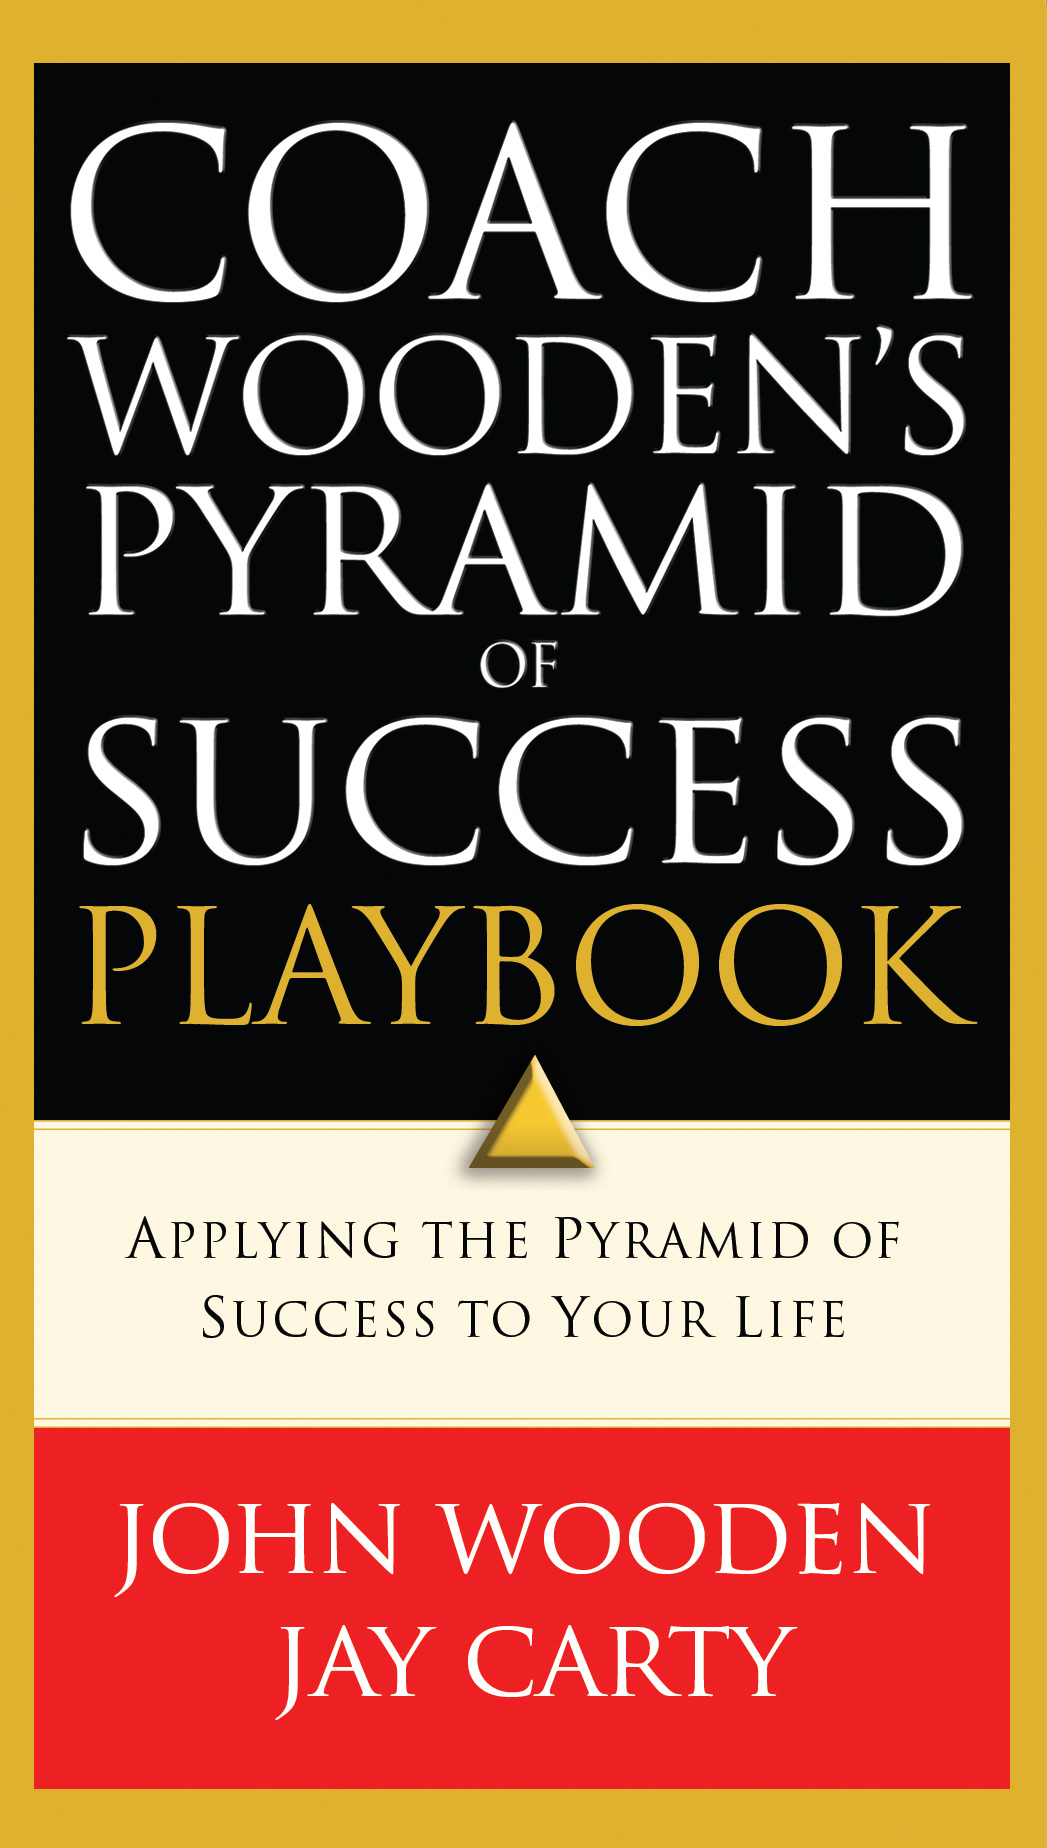 Coach Wooden's Pyramid of Success Playbook - <10